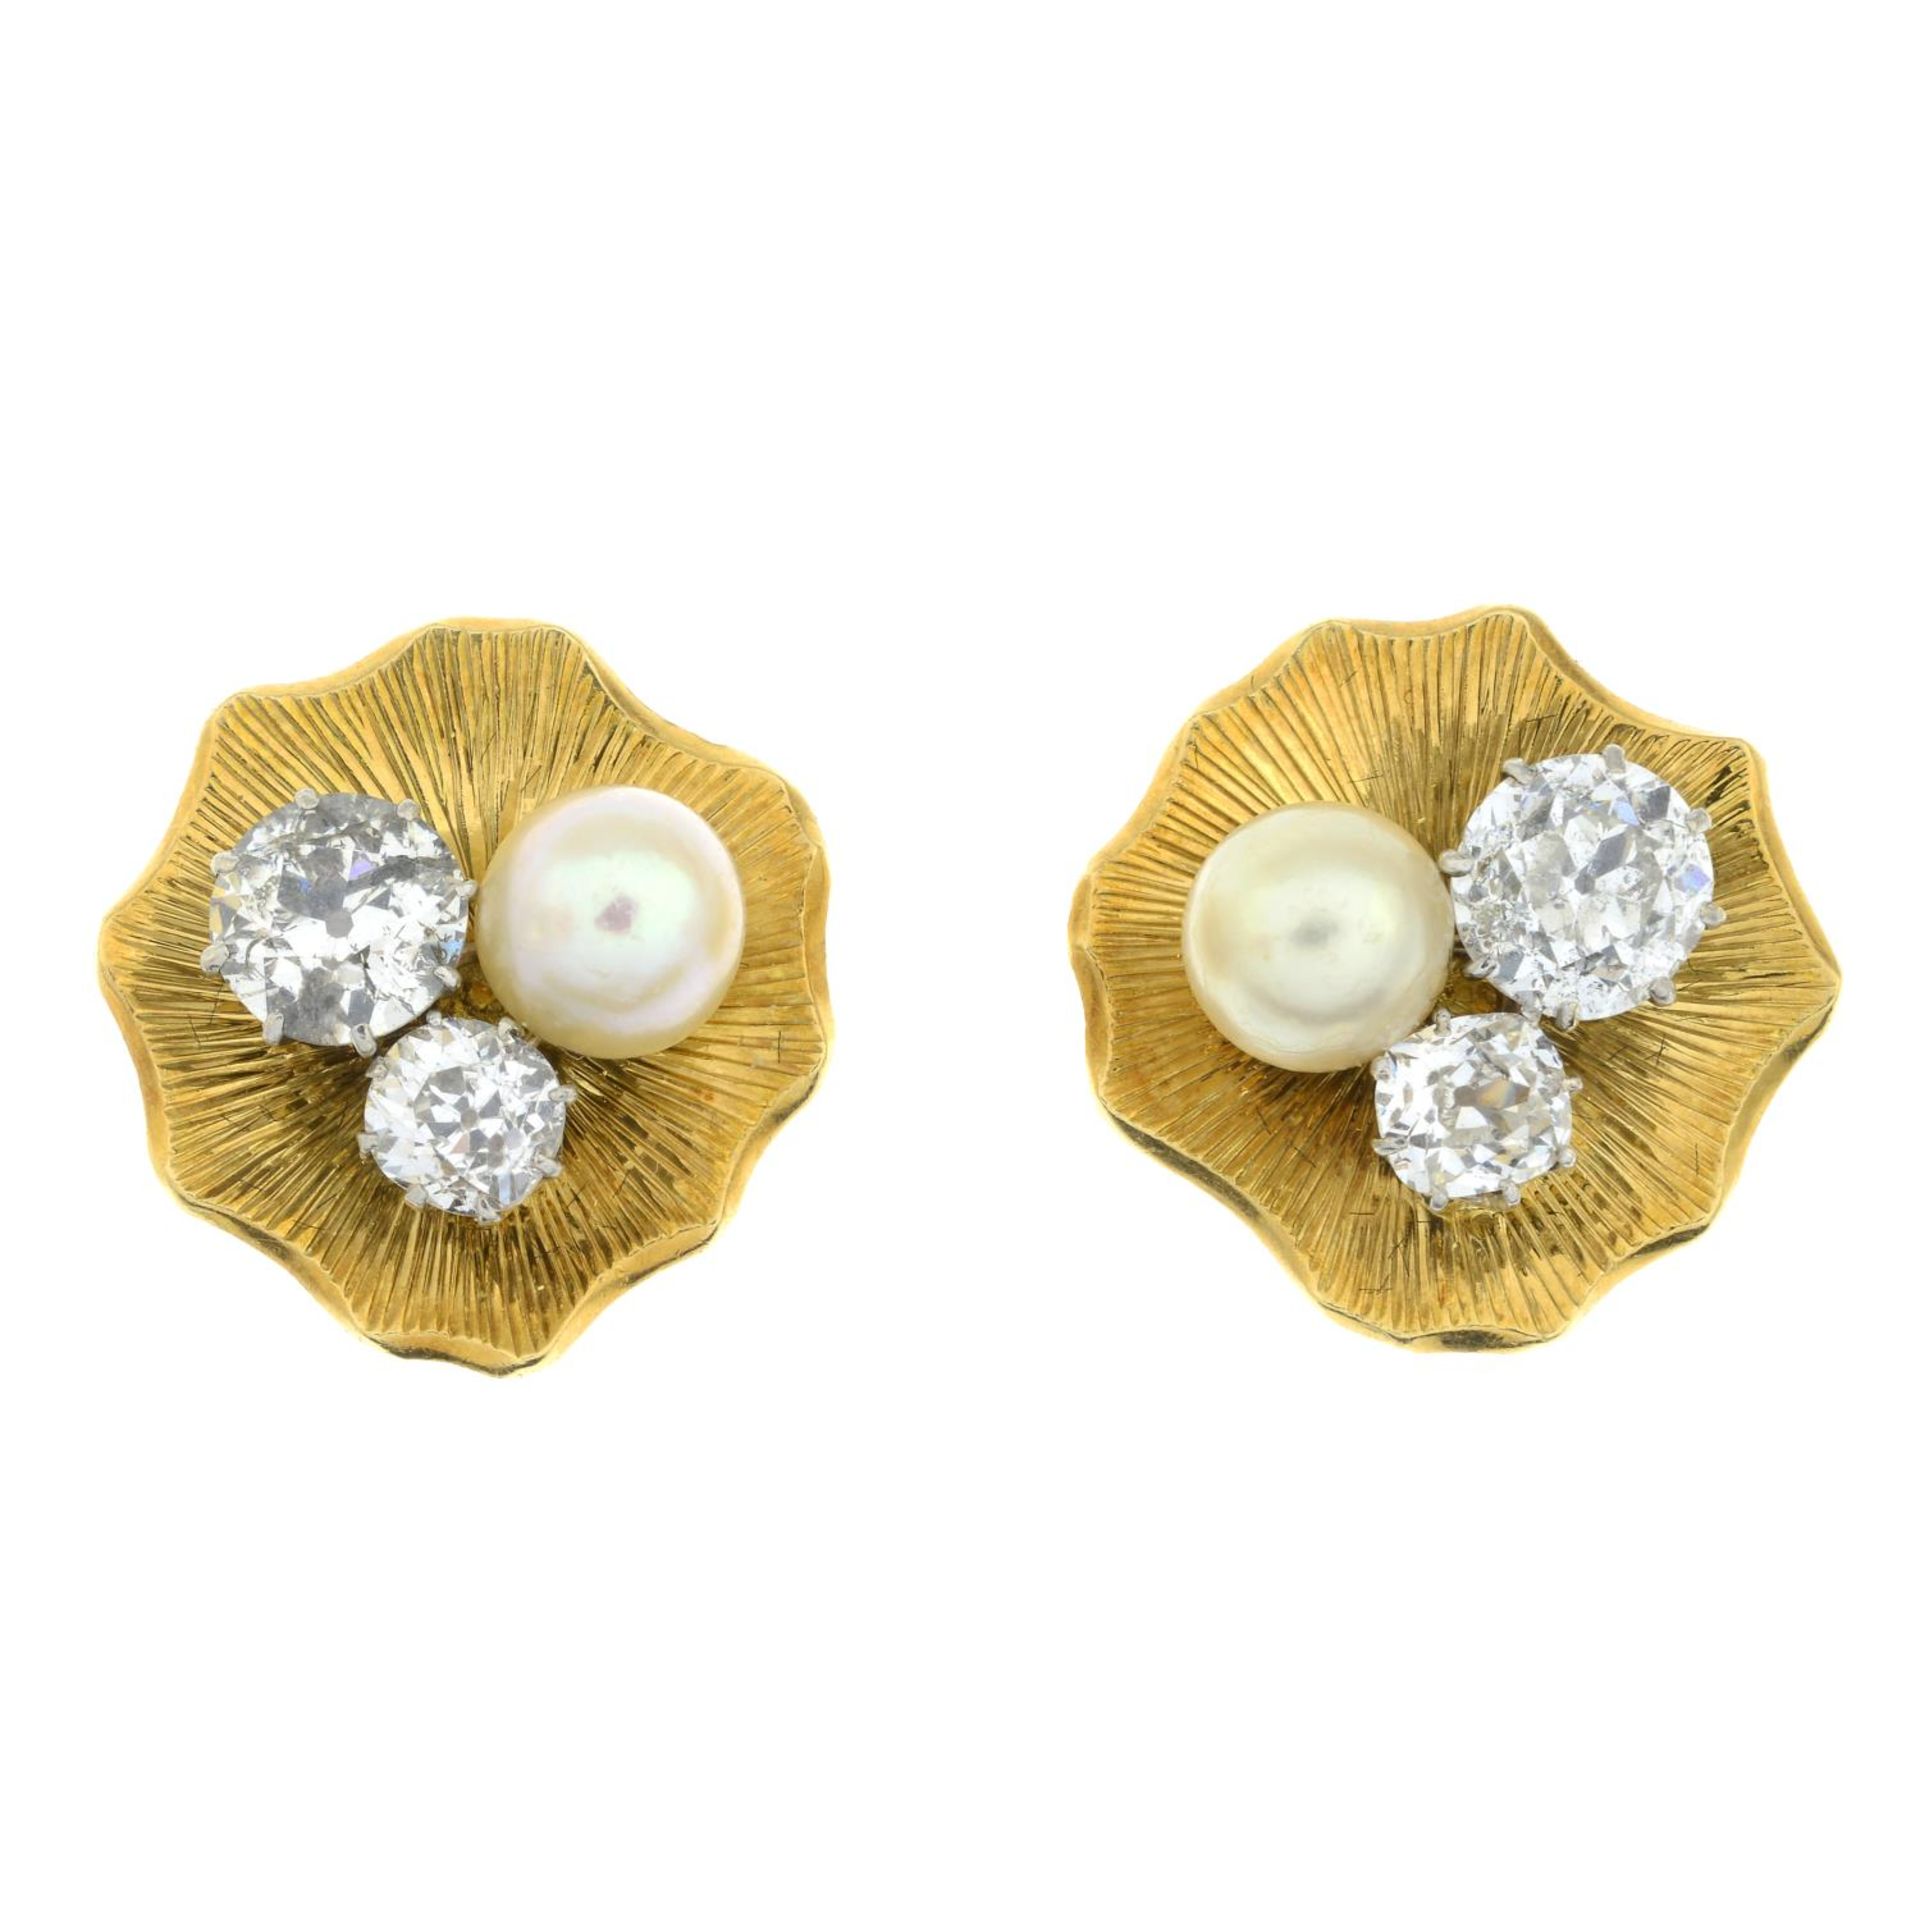 A pair of 1960s 18ct gold old-cut diamond and pearl textured earrings. - Image 3 of 5